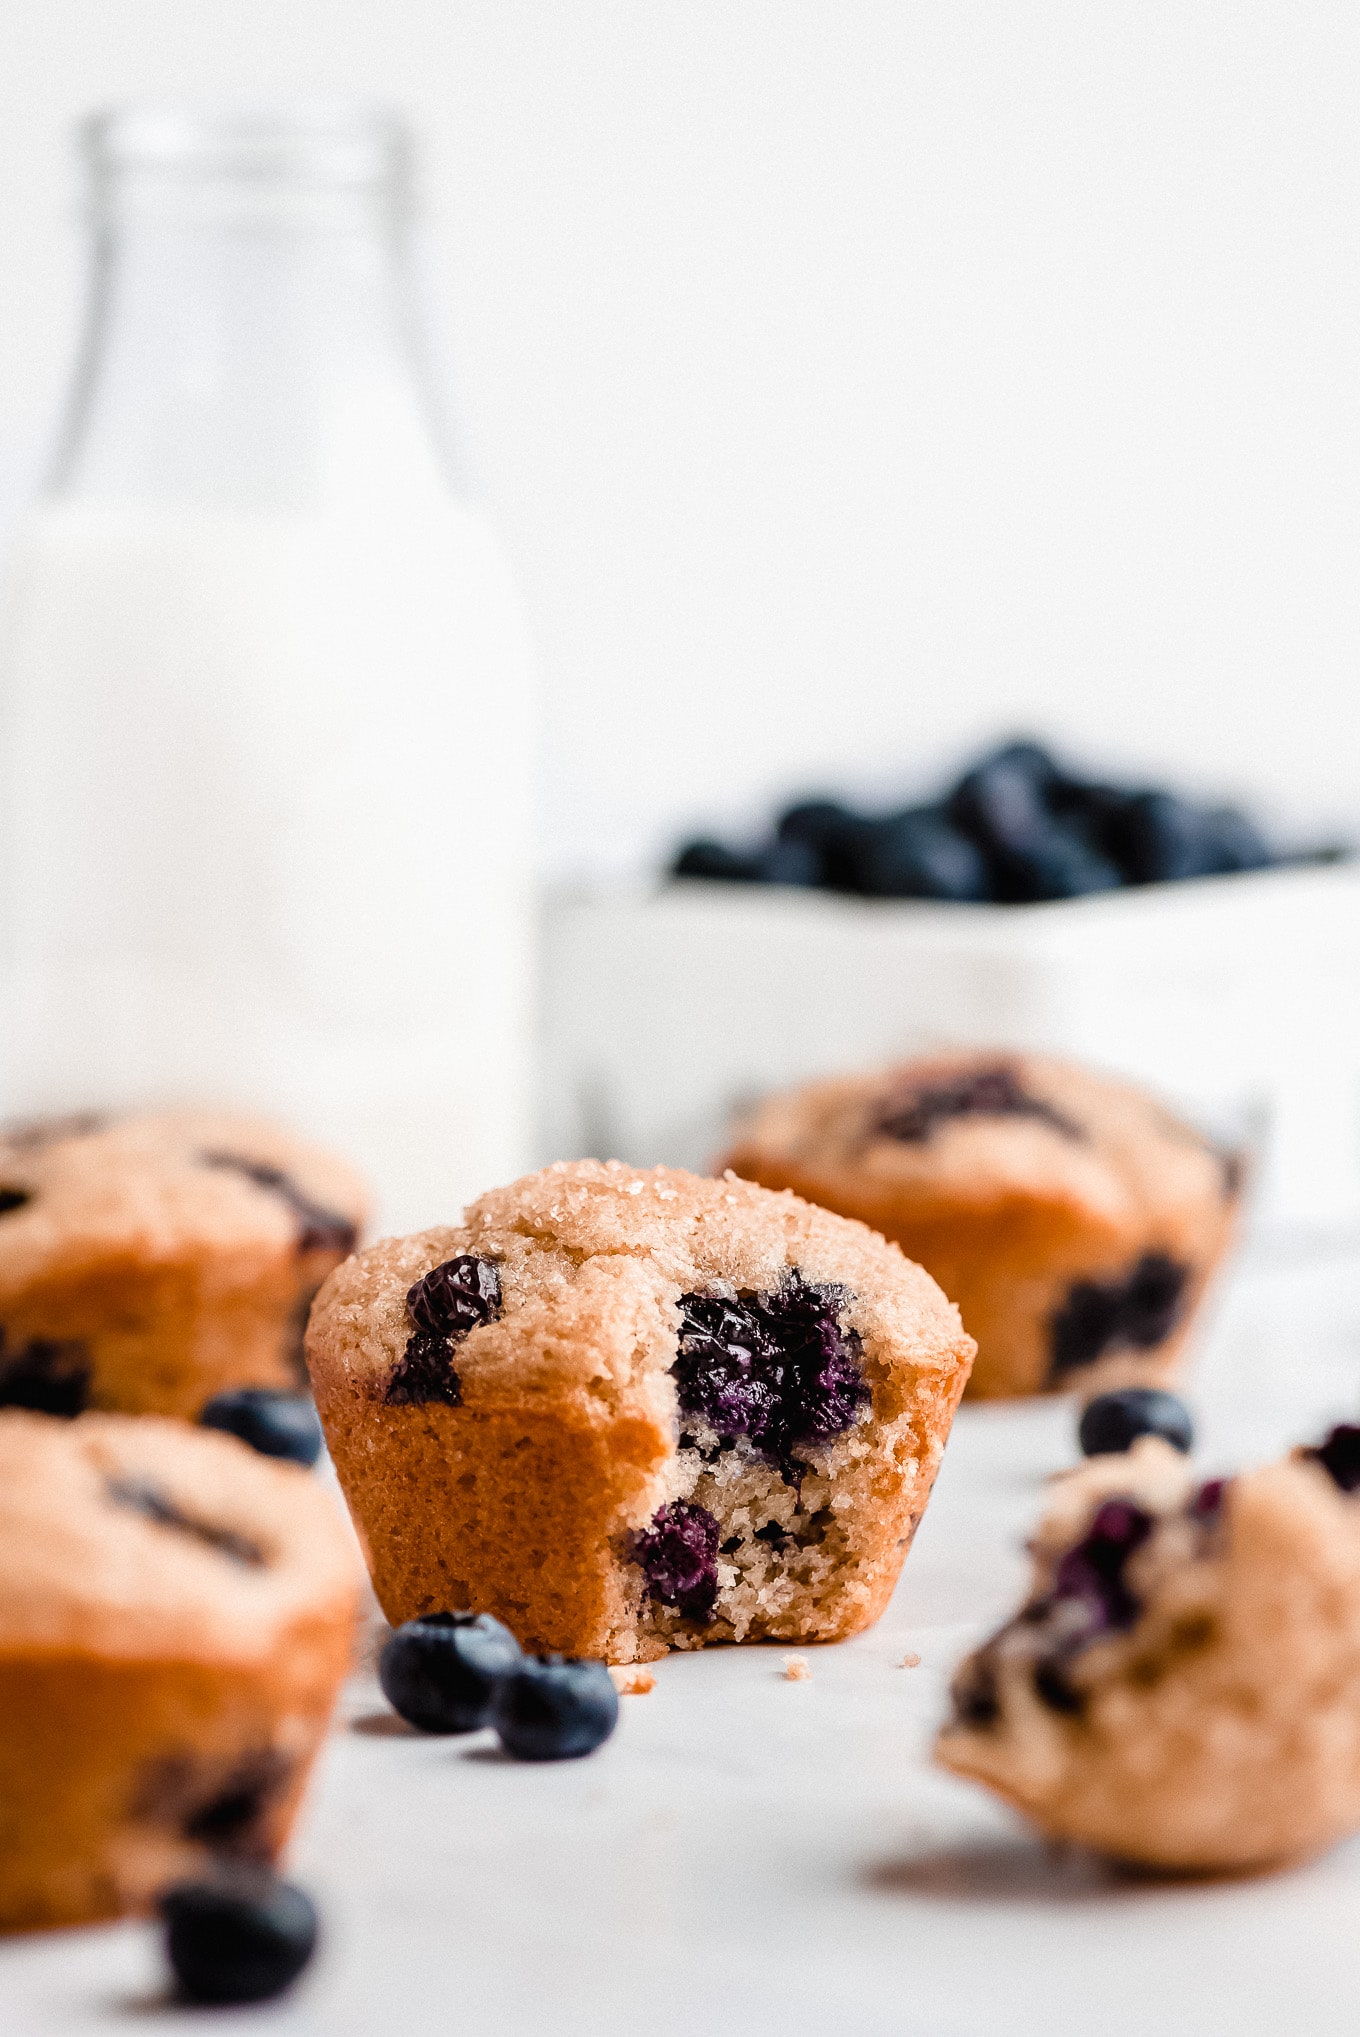 Greek Yogurt Blueberry muffins with a bite taken out of one to show the bursting blueberries inside.